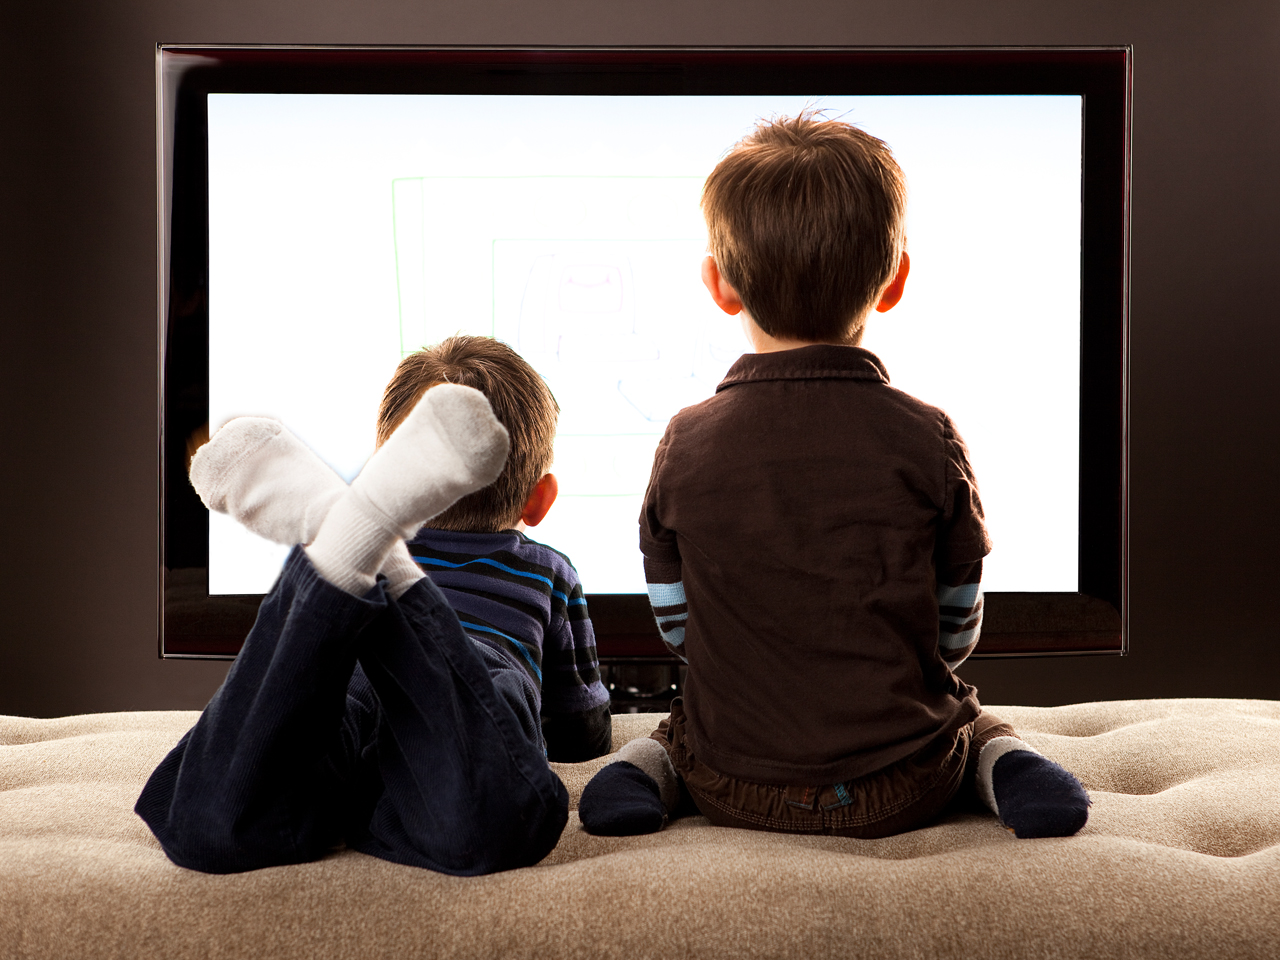 According to a research, children who are permitted to watch a lot of television are more likely to be misbehaved